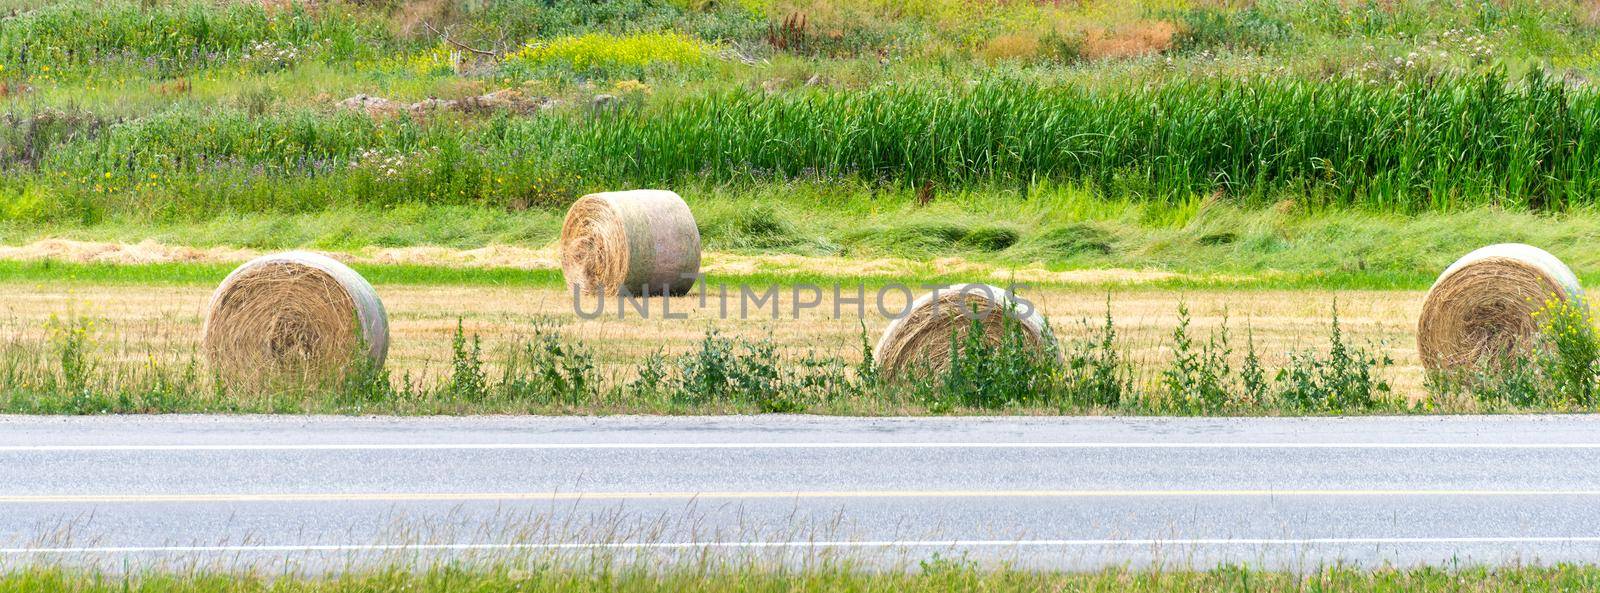 Dry yellow straw bales laying on the farm field at the road by Imagenet